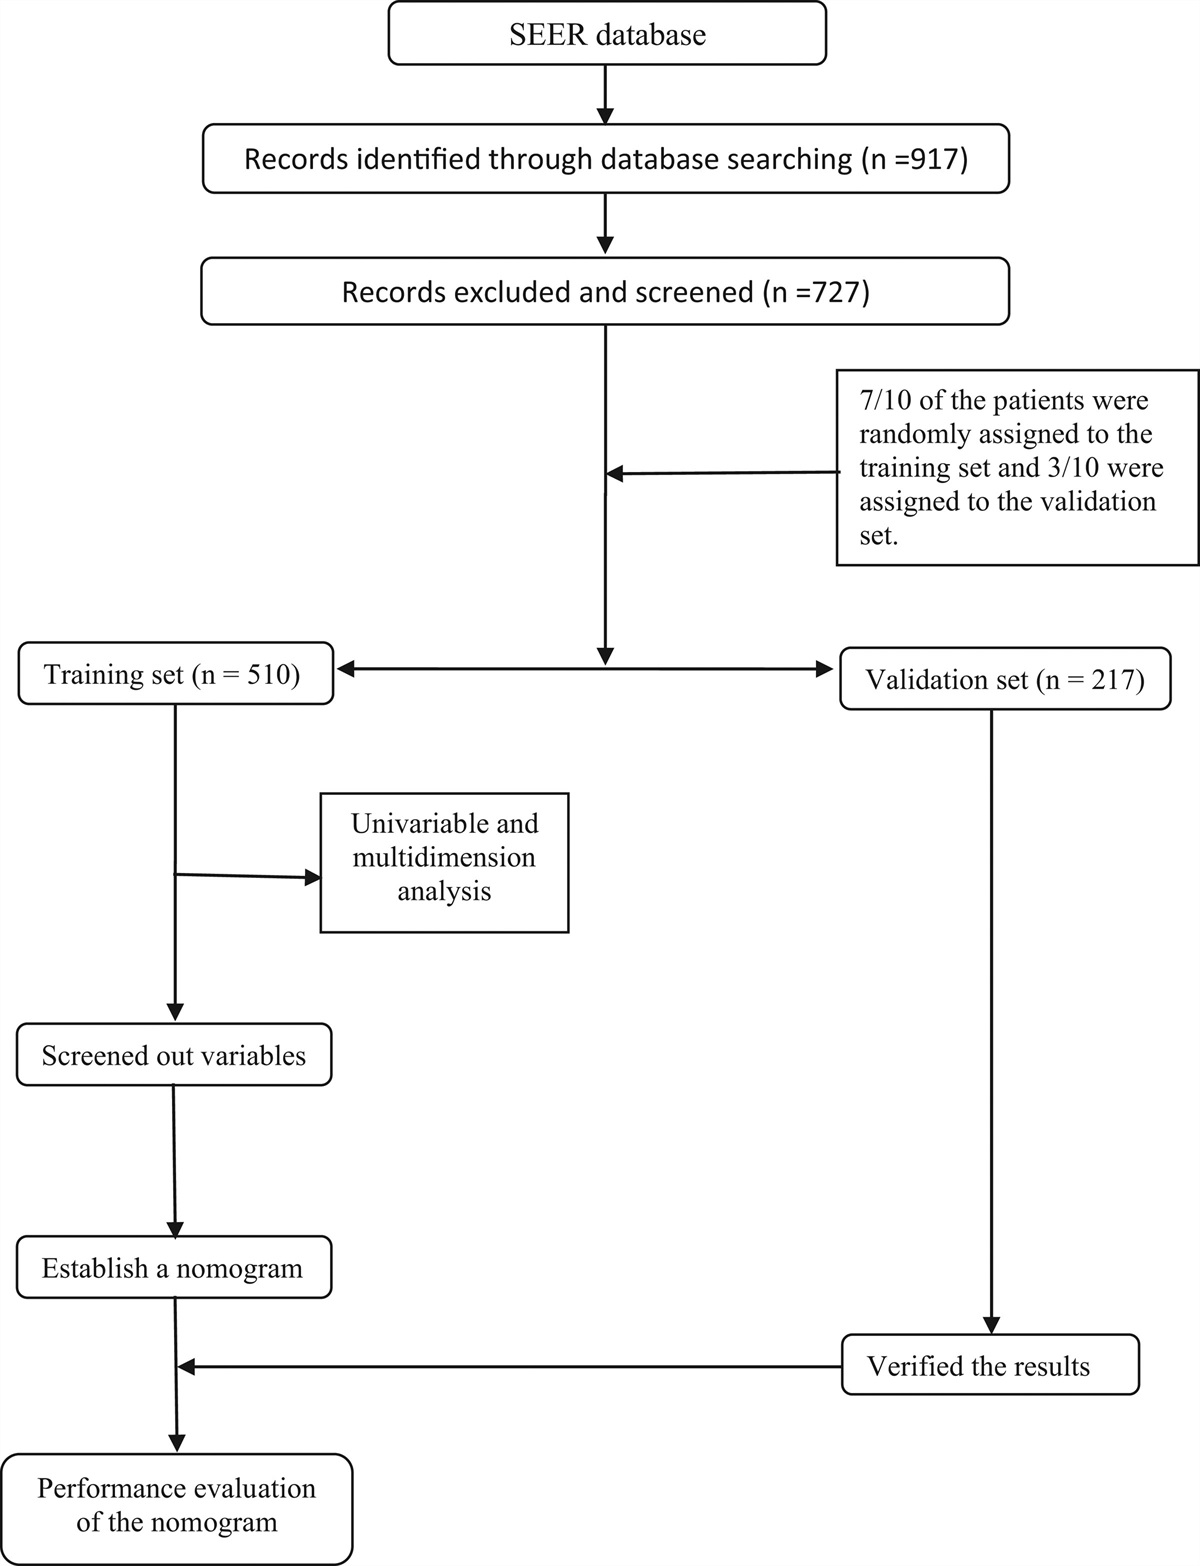 Construction and validation of the predictive model for gallbladder cancer liver metastasis patients: a SEER-based study